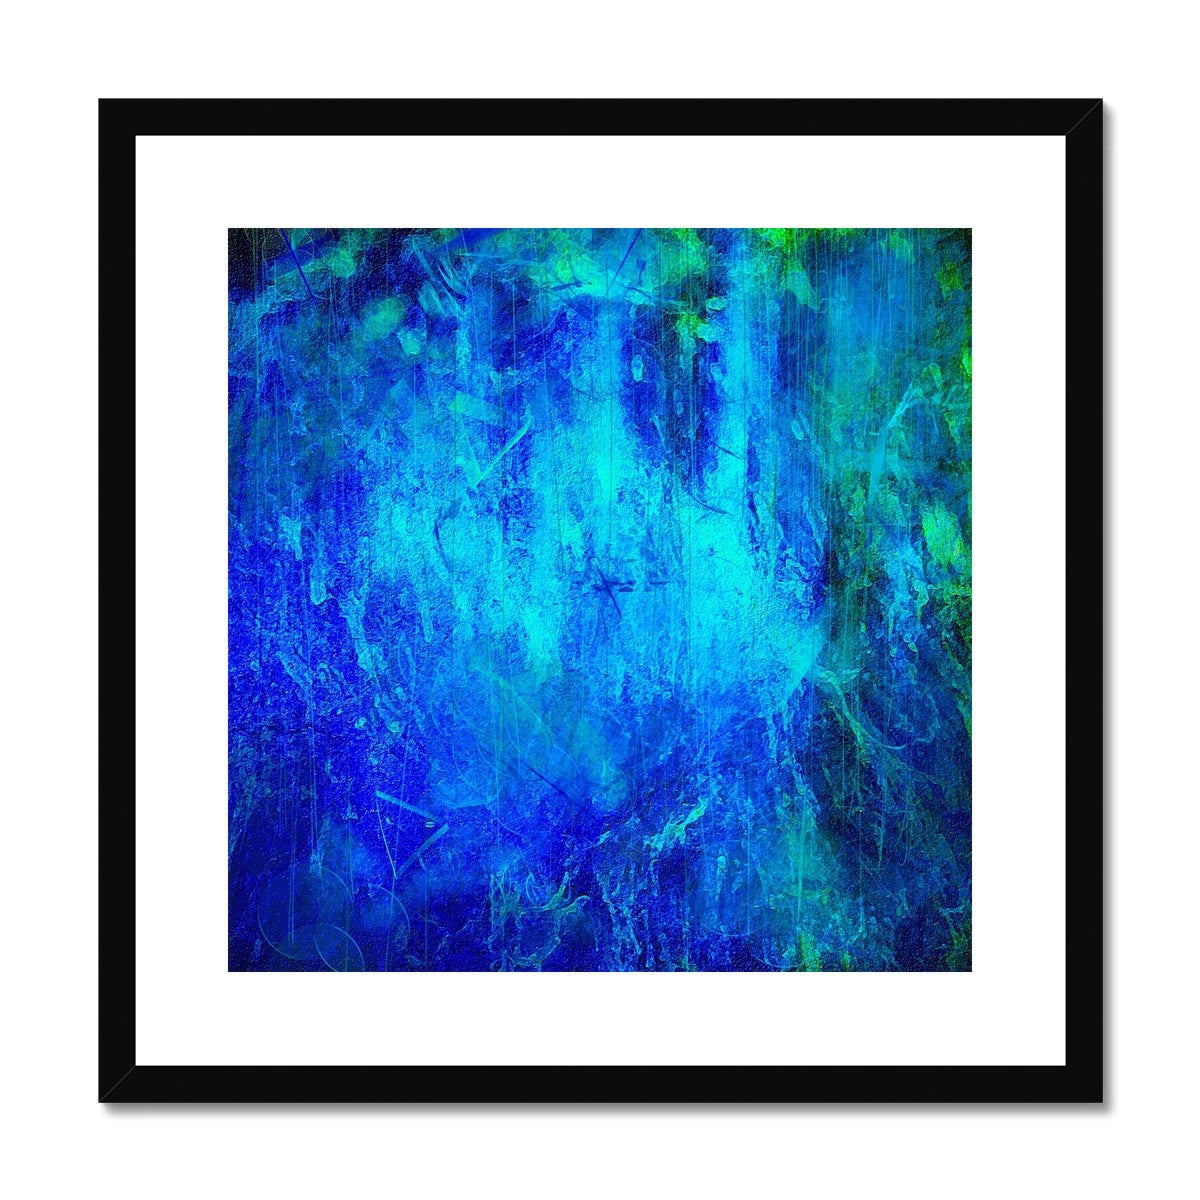 The Waterfall Abstract Painting | Framed & Mounted Prints From Scotland-Framed & Mounted Prints-Abstract & Impressionistic Art Gallery-20"x20"-Black Frame-Paintings, Prints, Homeware, Art Gifts From Scotland By Scottish Artist Kevin Hunter